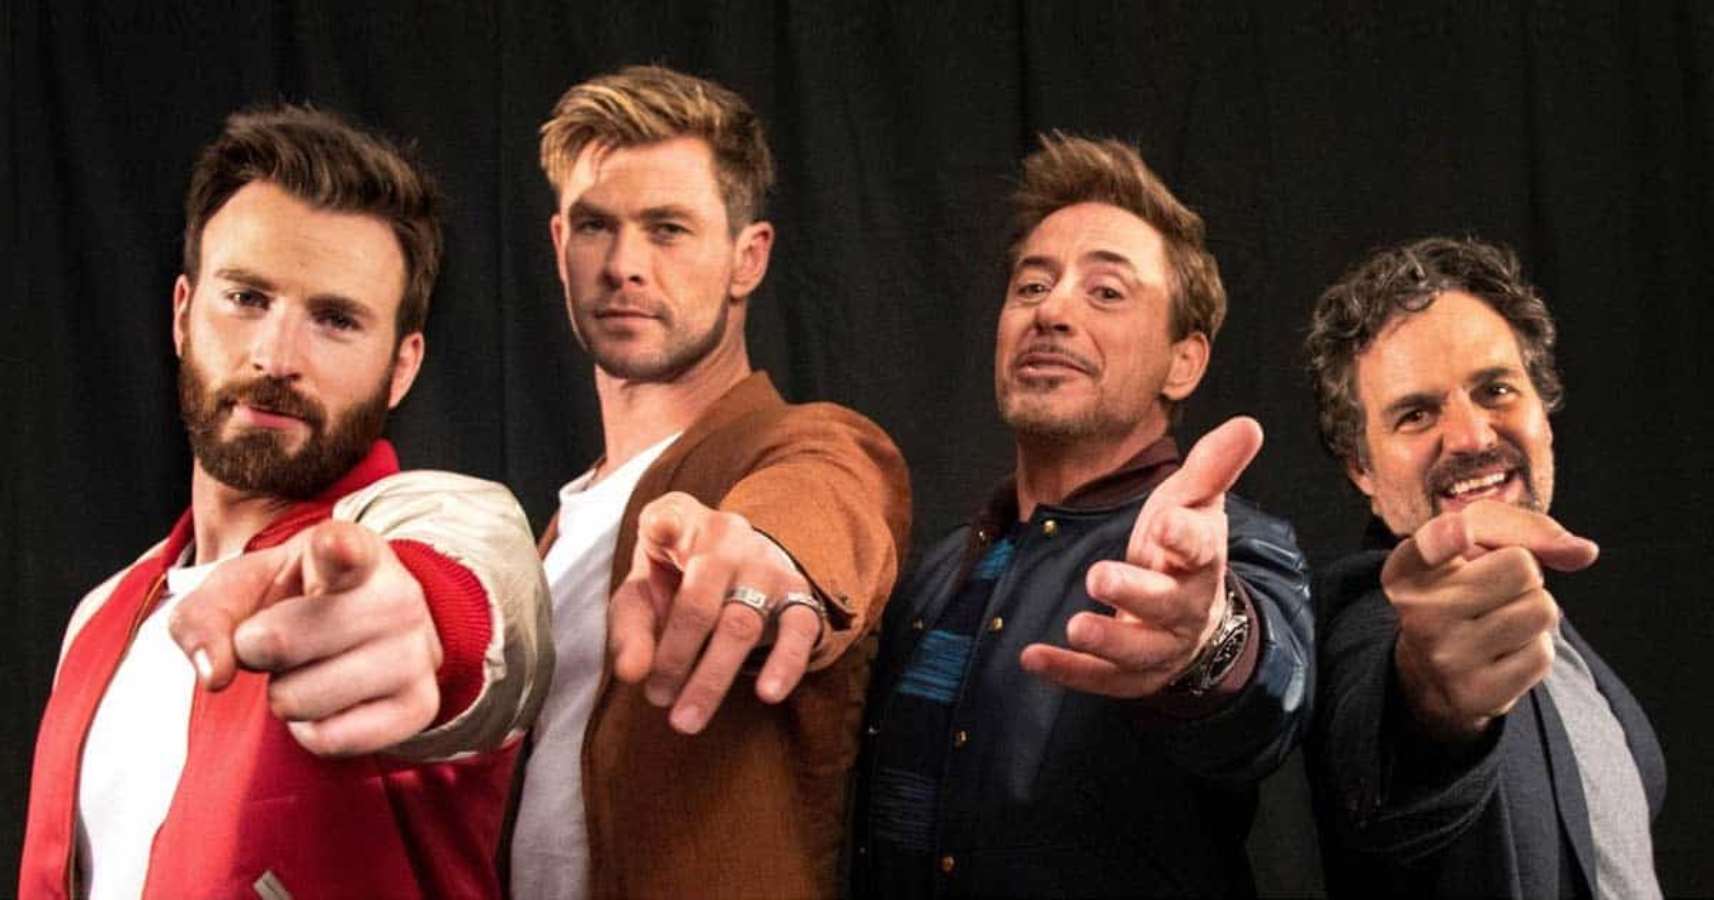 130150036-chris-hemsworth-says-its-time-to-get-the-band-back-while-reacting-to-him-chris-evans-robert-downey-jr-mark-ruffalo-singing-001.jpg